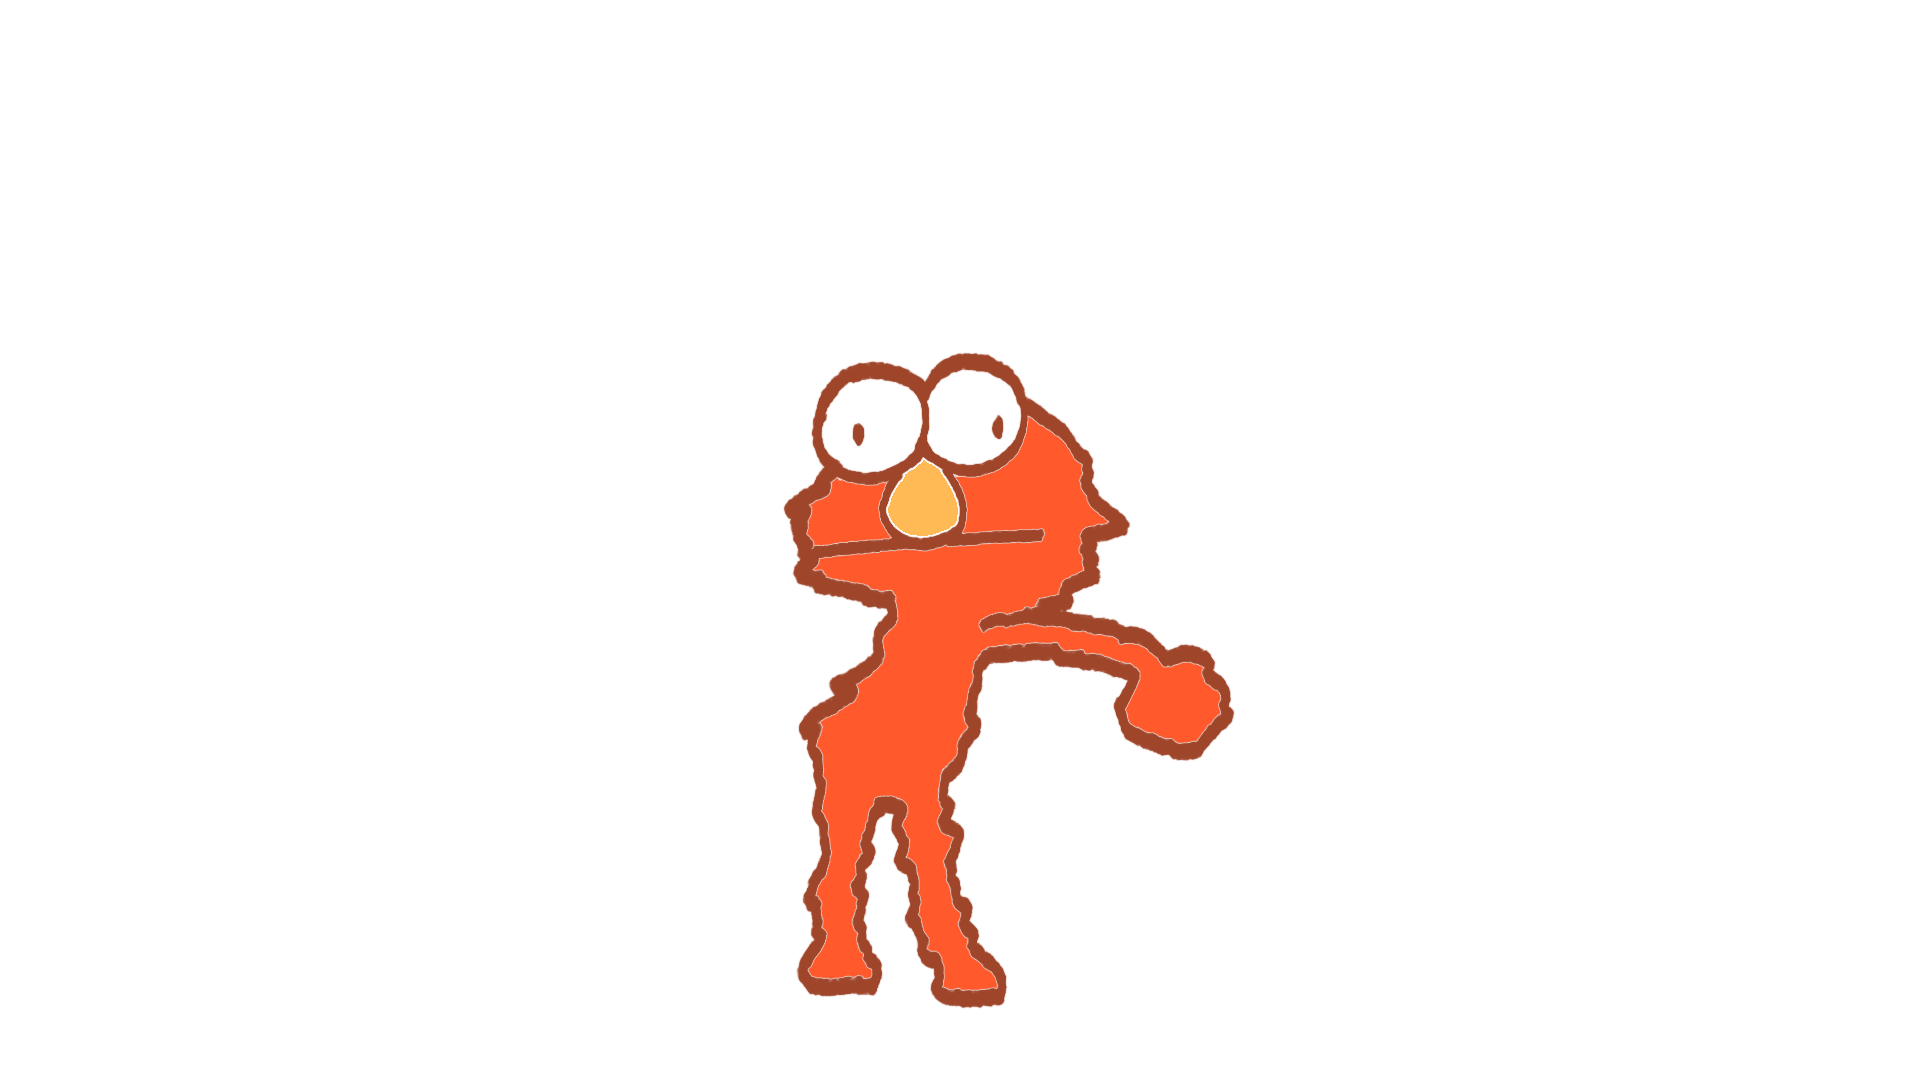 Elmo Flossing Animated Gif by Tyro1301 on DeviantArt - Clip Art Library